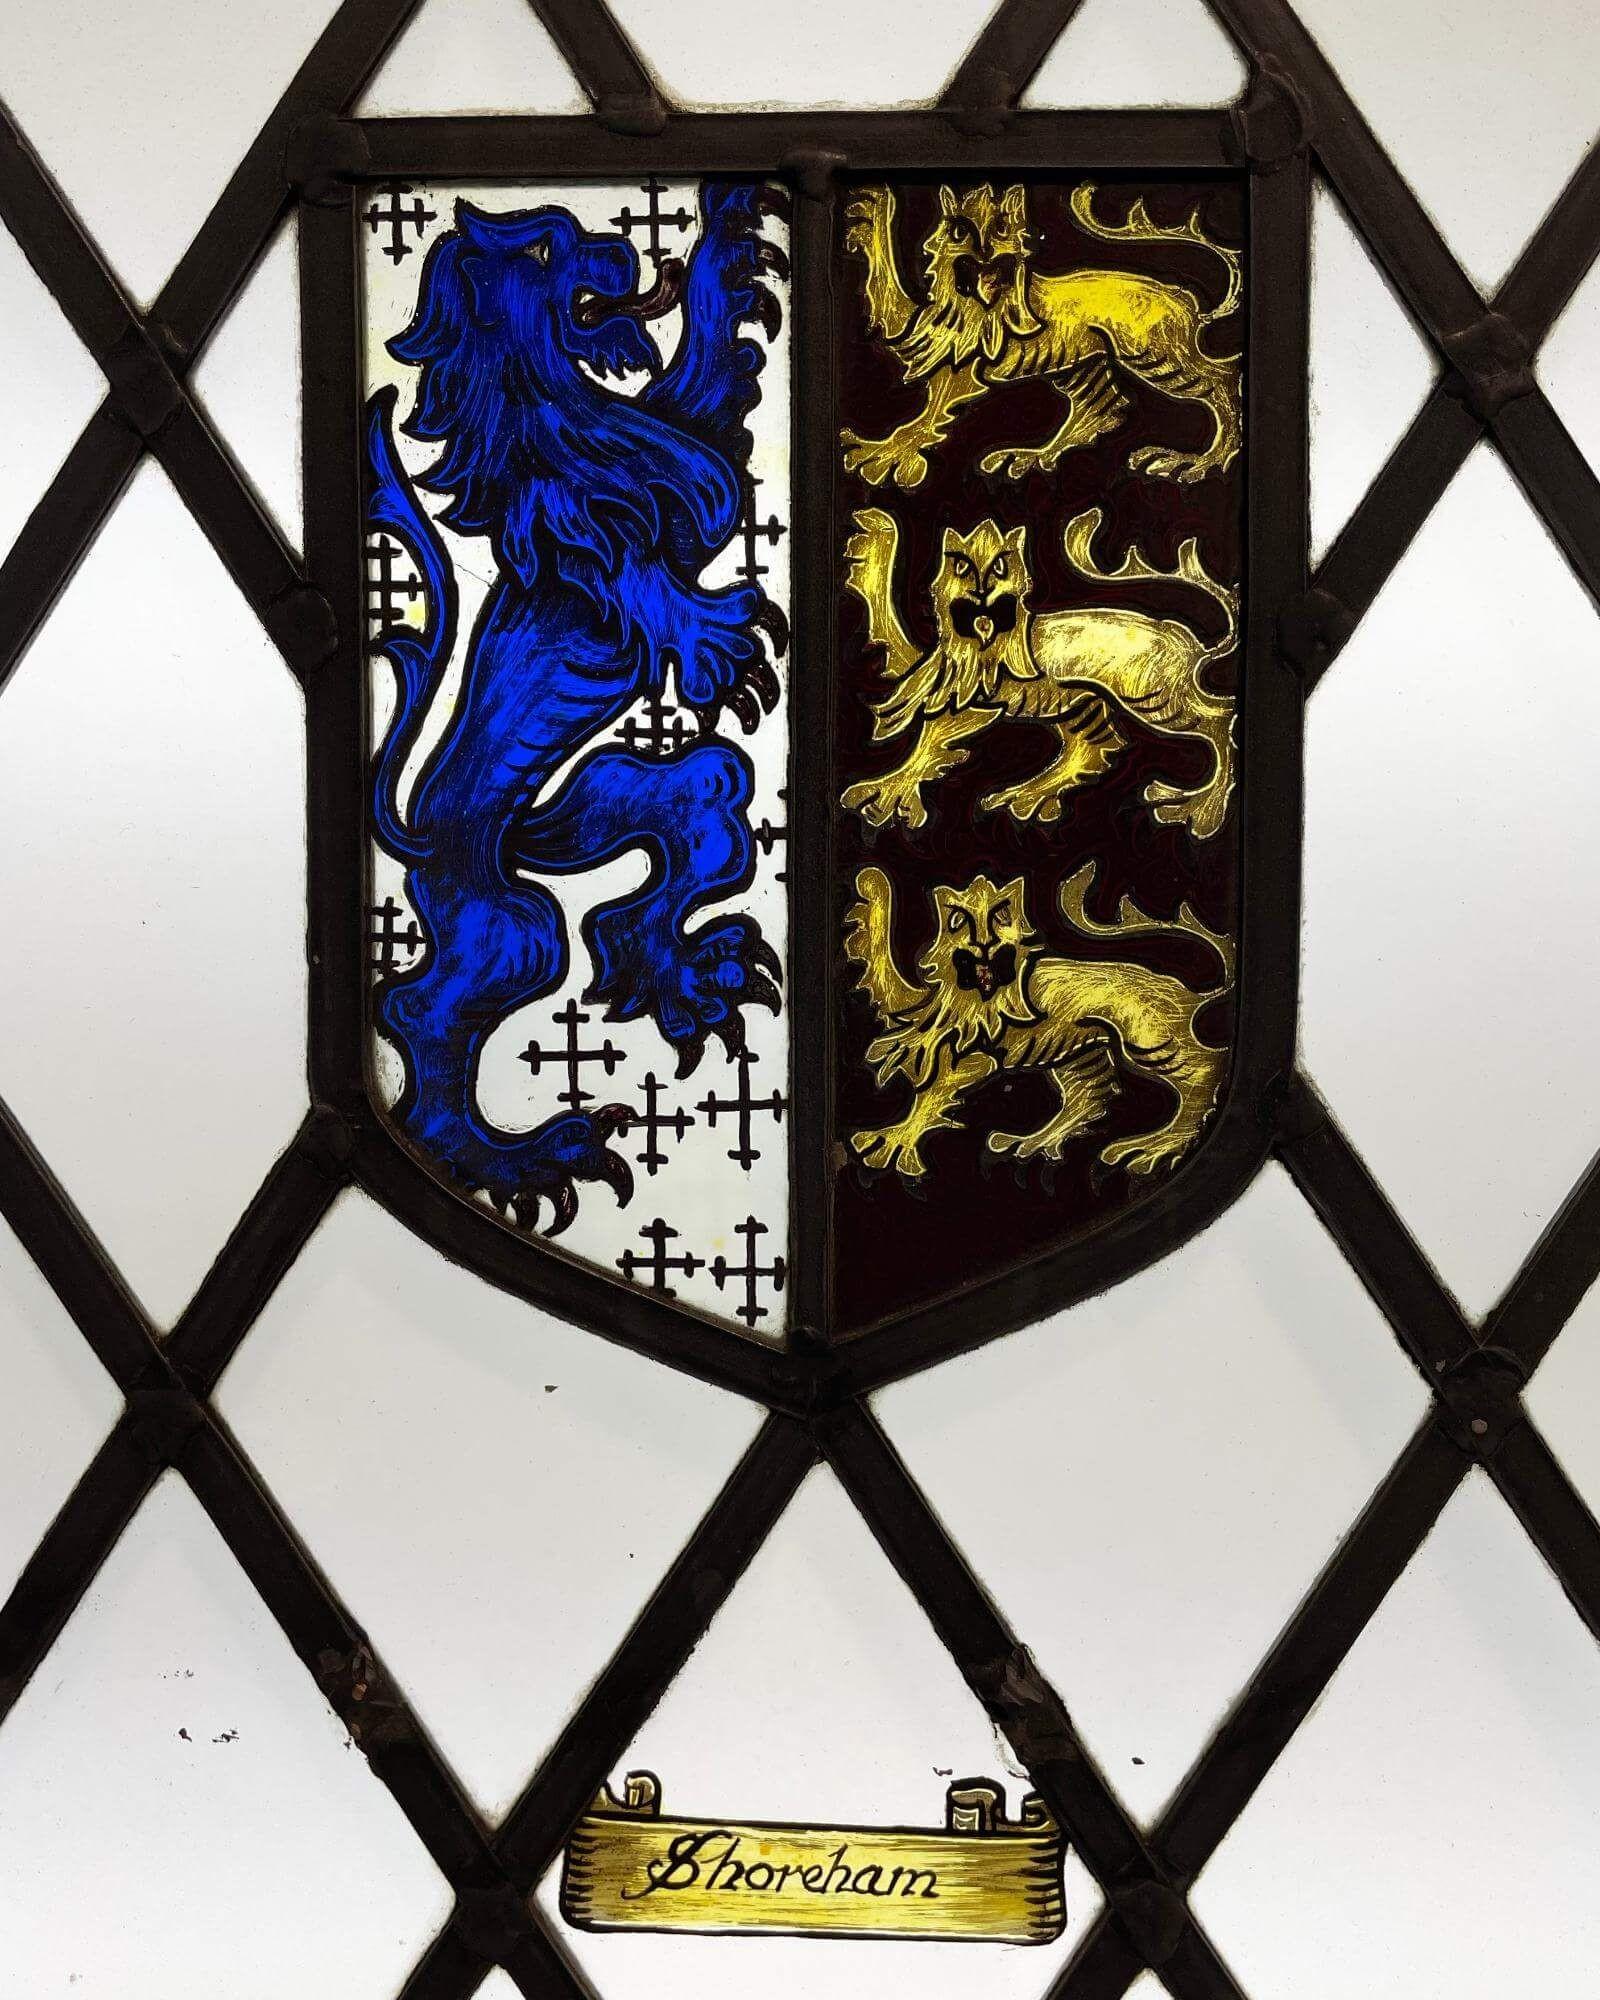 An early 20th century antique English stained glass window detailed with the Shoreham-by-Sea Coat of Arms. This stained glass window is one of a series of panels we are selling from towns and cities on the south coast of the British Isles.

The